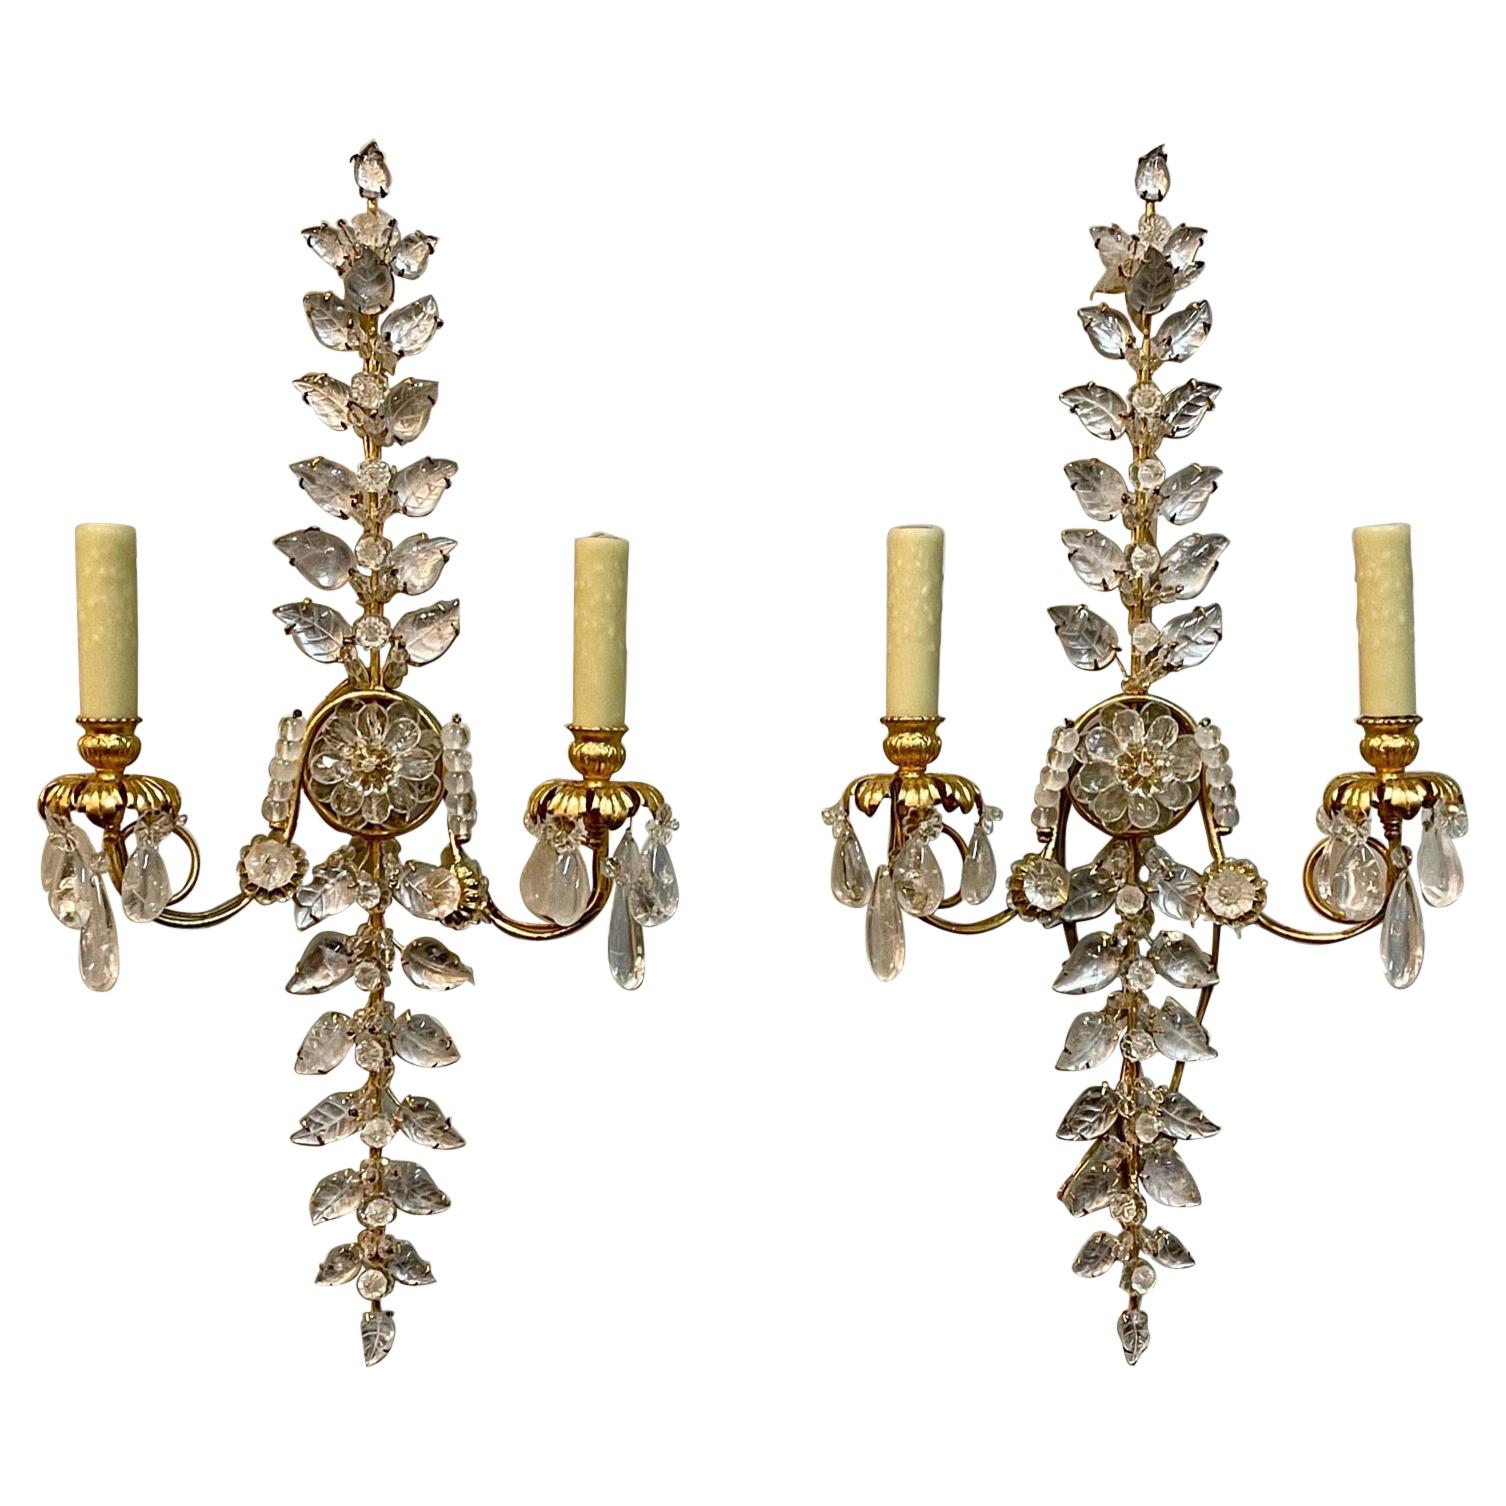 Pair of Italian Bagues Style Rock Crystal Wall Sconces